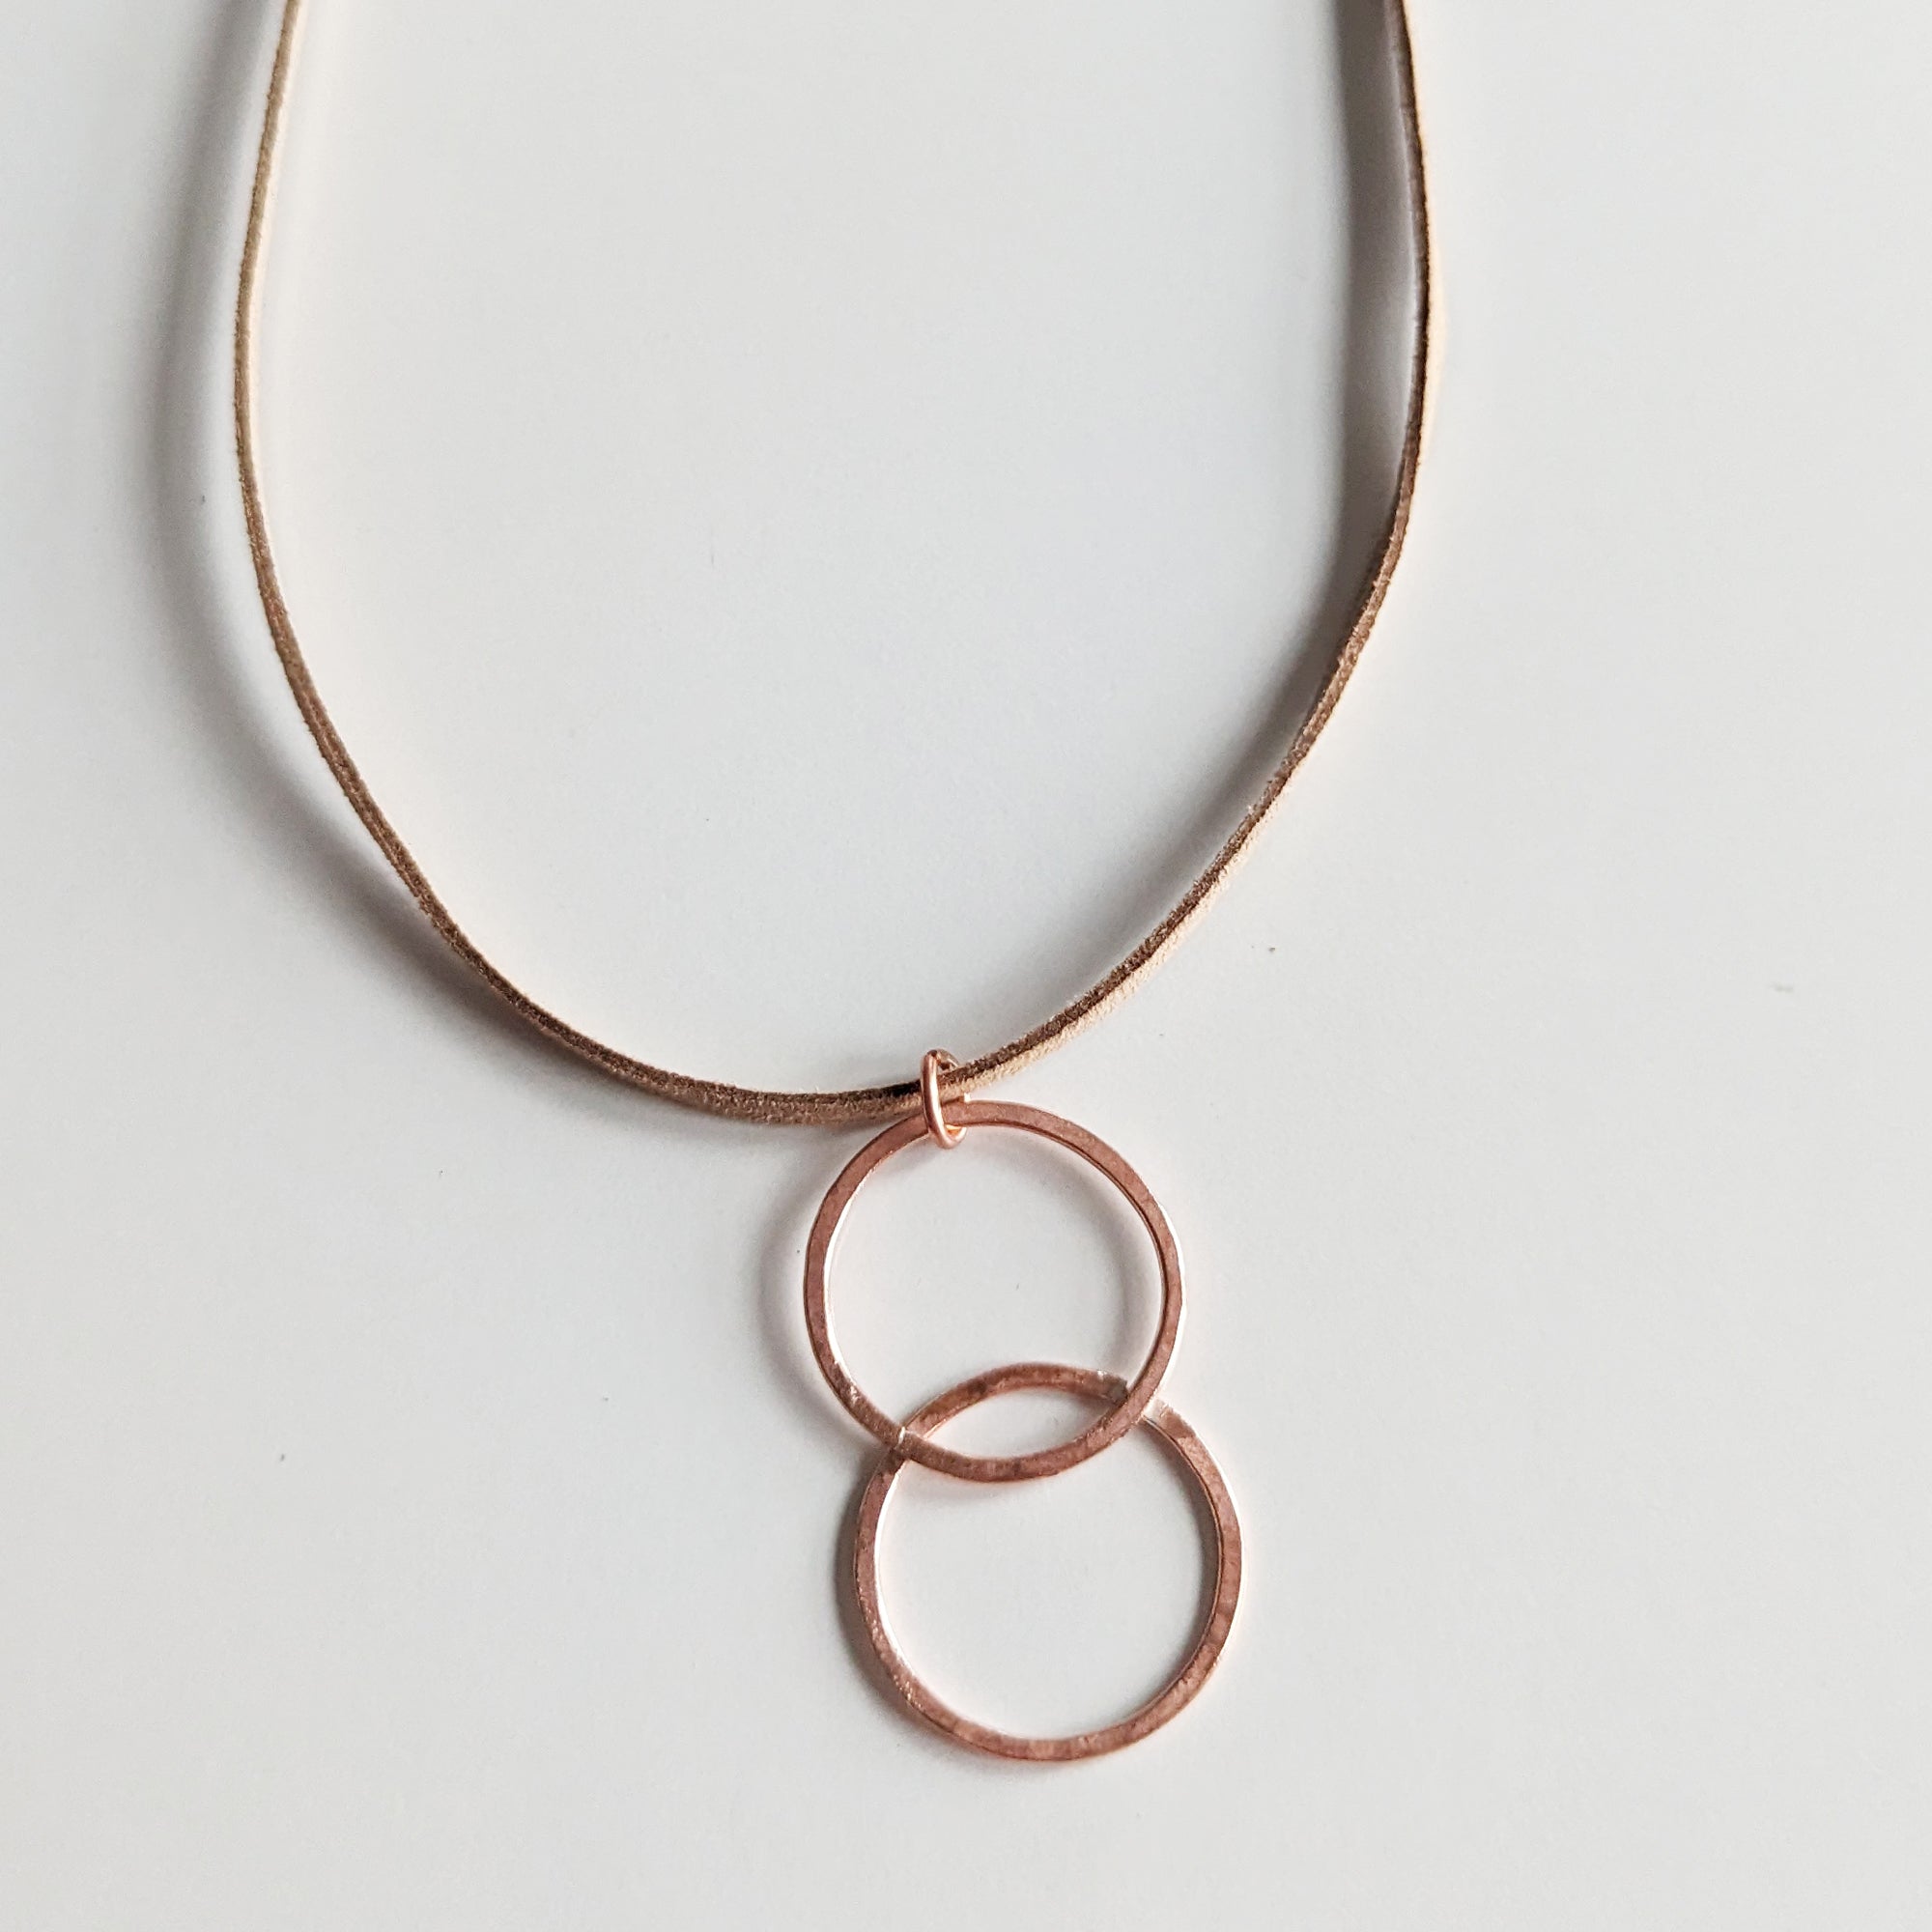 The Copper Double Hoop Necklace